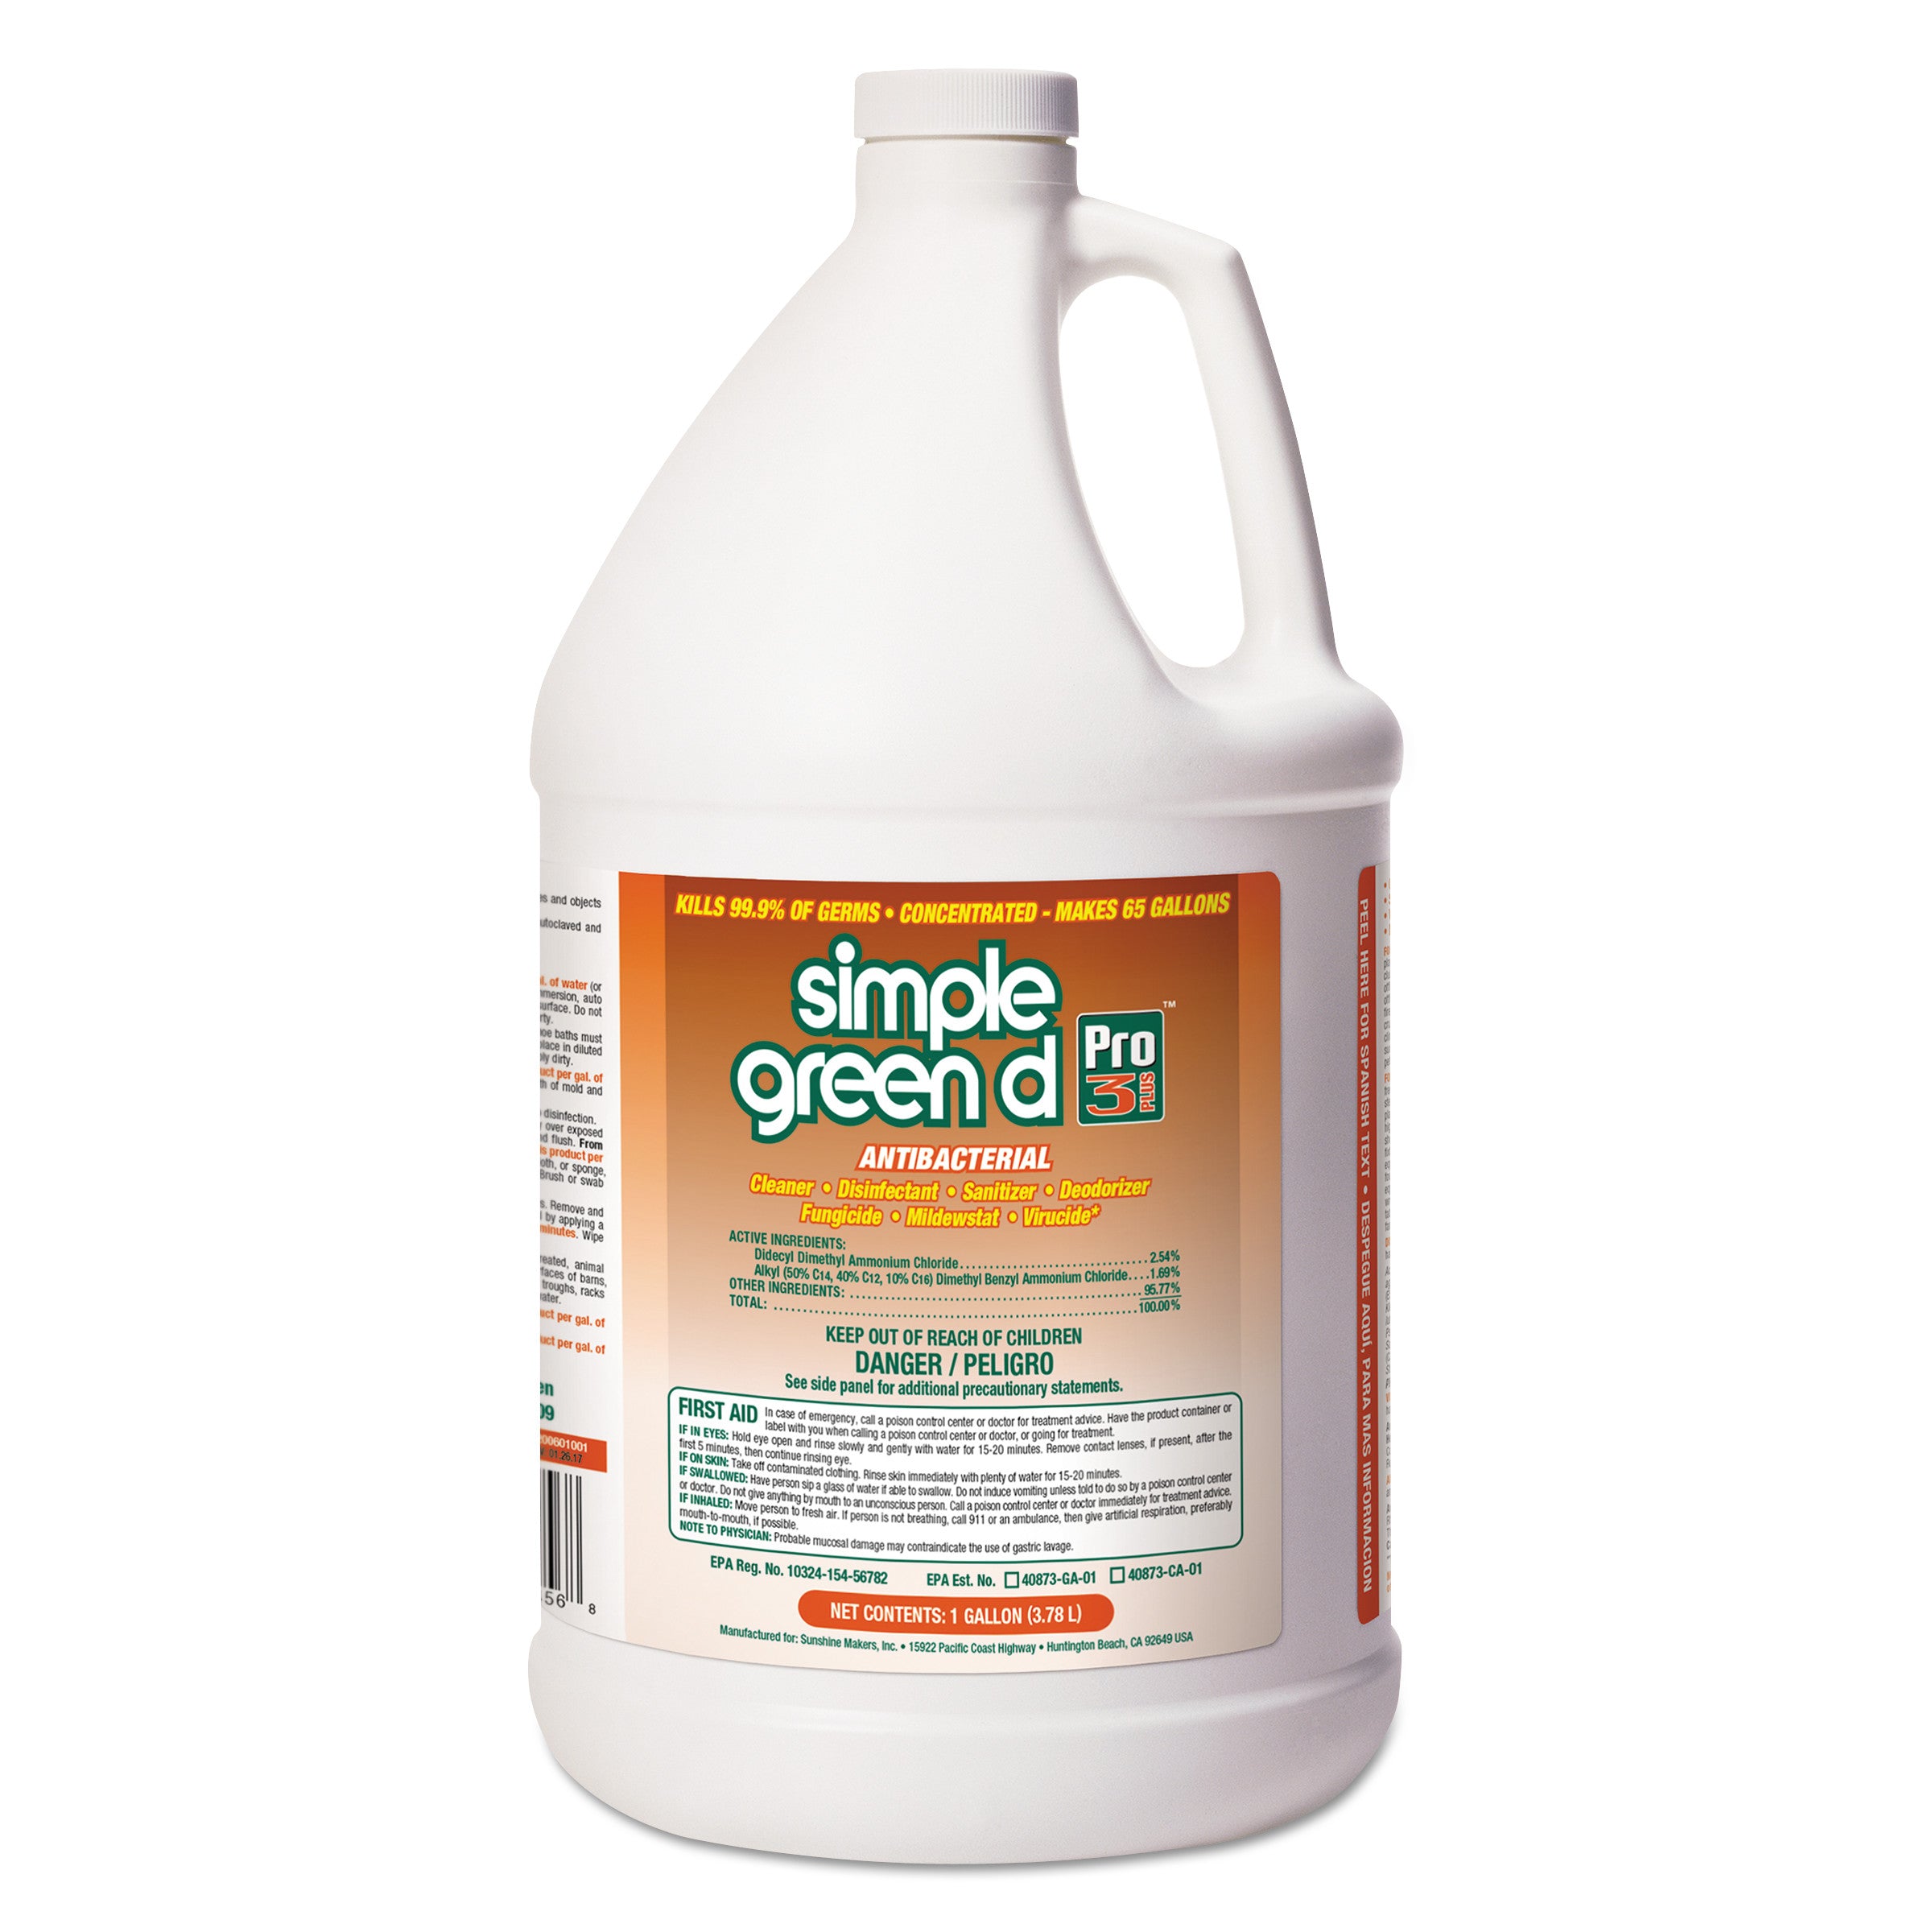 d-pro-3-plus-antibacterial-concentrate-herbal-1-gal-bottle-6-carton_smp01001 - 1